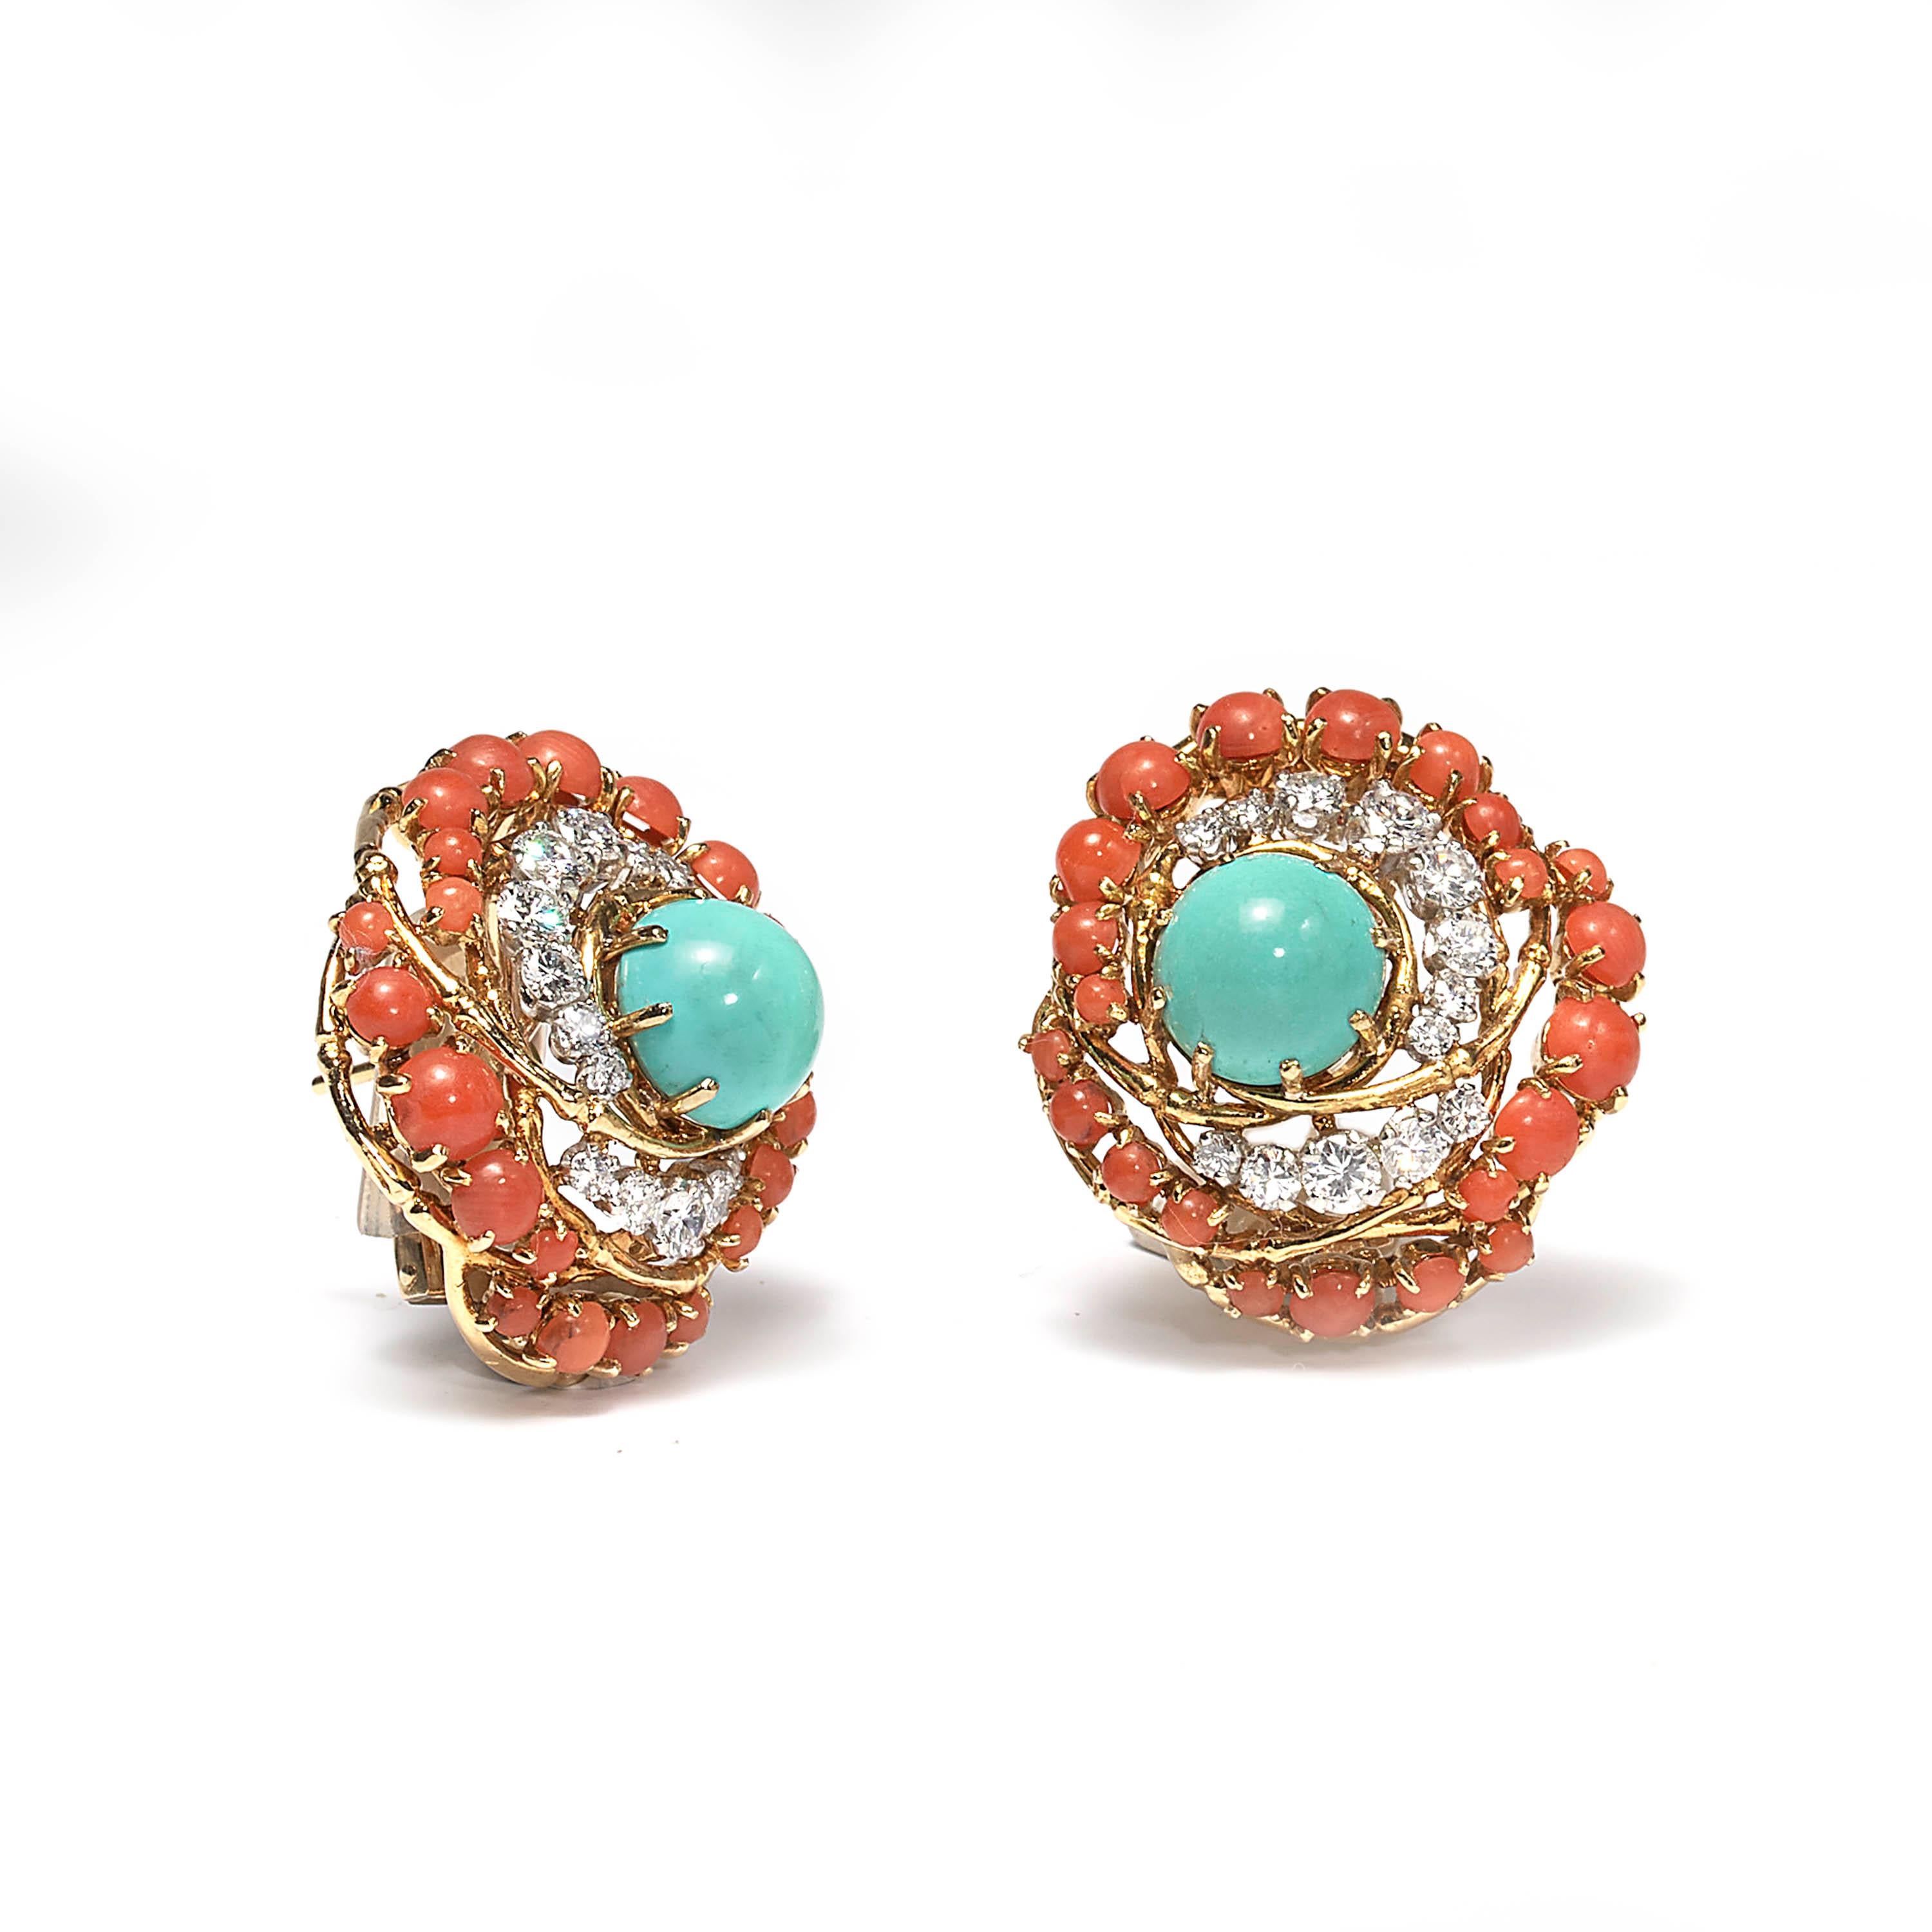 A pair of turquoise, coral and diamond cluster ear clips, cabochon cut turquoise, claw set at the centre of a swirl designed surround of round brilliant cut diamonds and round cabochon cut corals, mounted in 18ct yellow gold with French hallmarks.